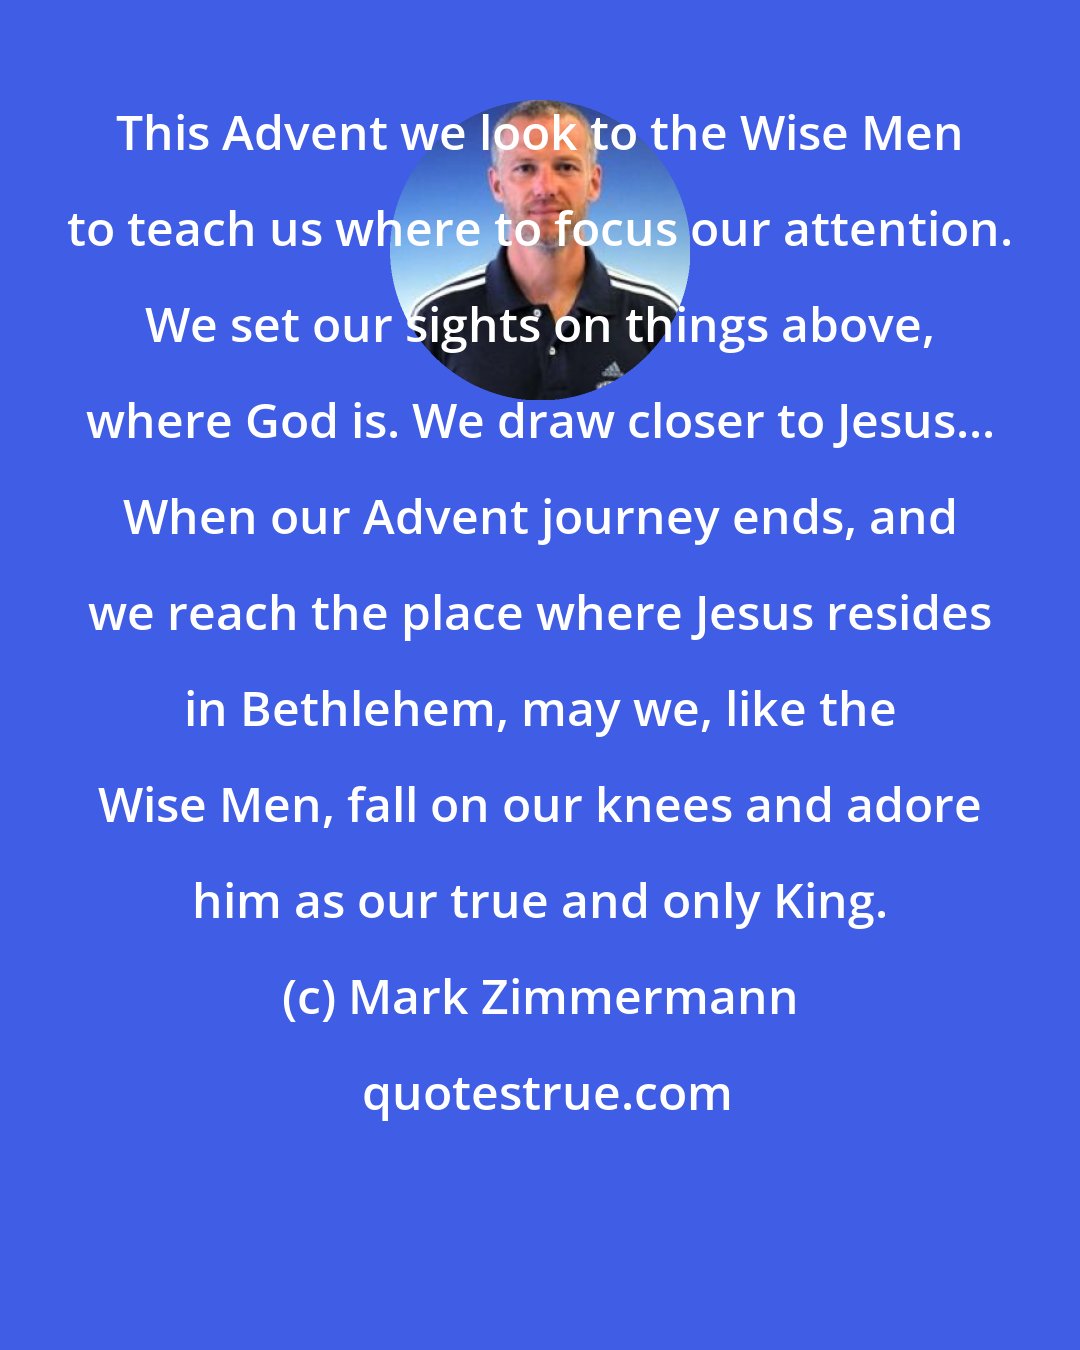 Mark Zimmermann: This Advent we look to the Wise Men to teach us where to focus our attention. We set our sights on things above, where God is. We draw closer to Jesus... When our Advent journey ends, and we reach the place where Jesus resides in Bethlehem, may we, like the Wise Men, fall on our knees and adore him as our true and only King.